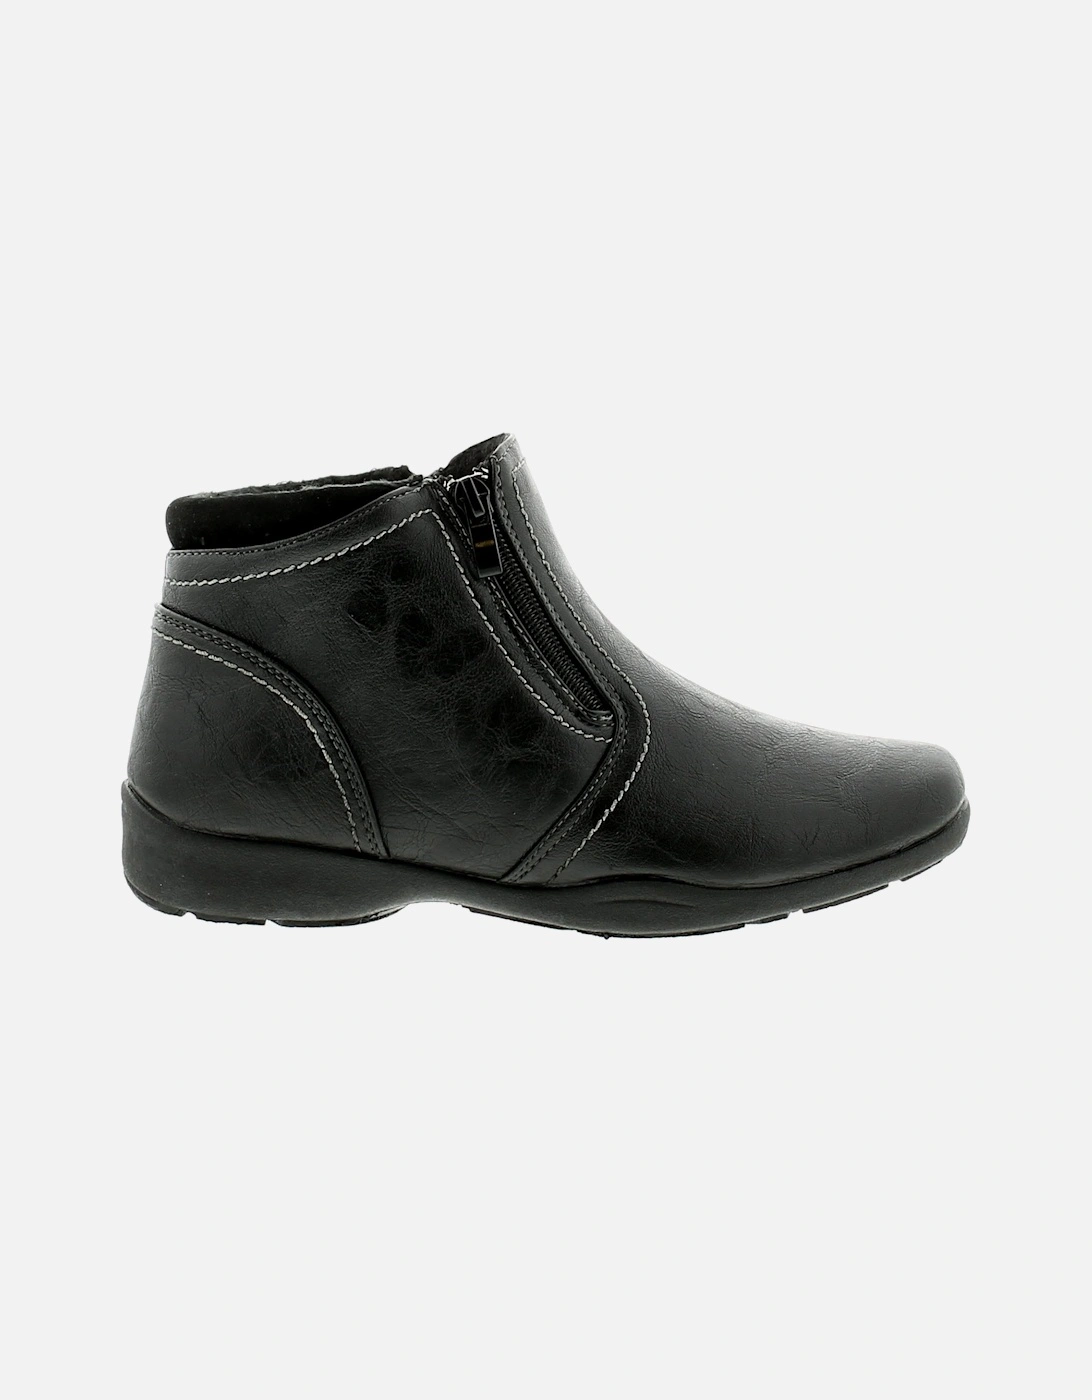 Womens Boots Ankle Anni pu Zip Fastening black UK Size